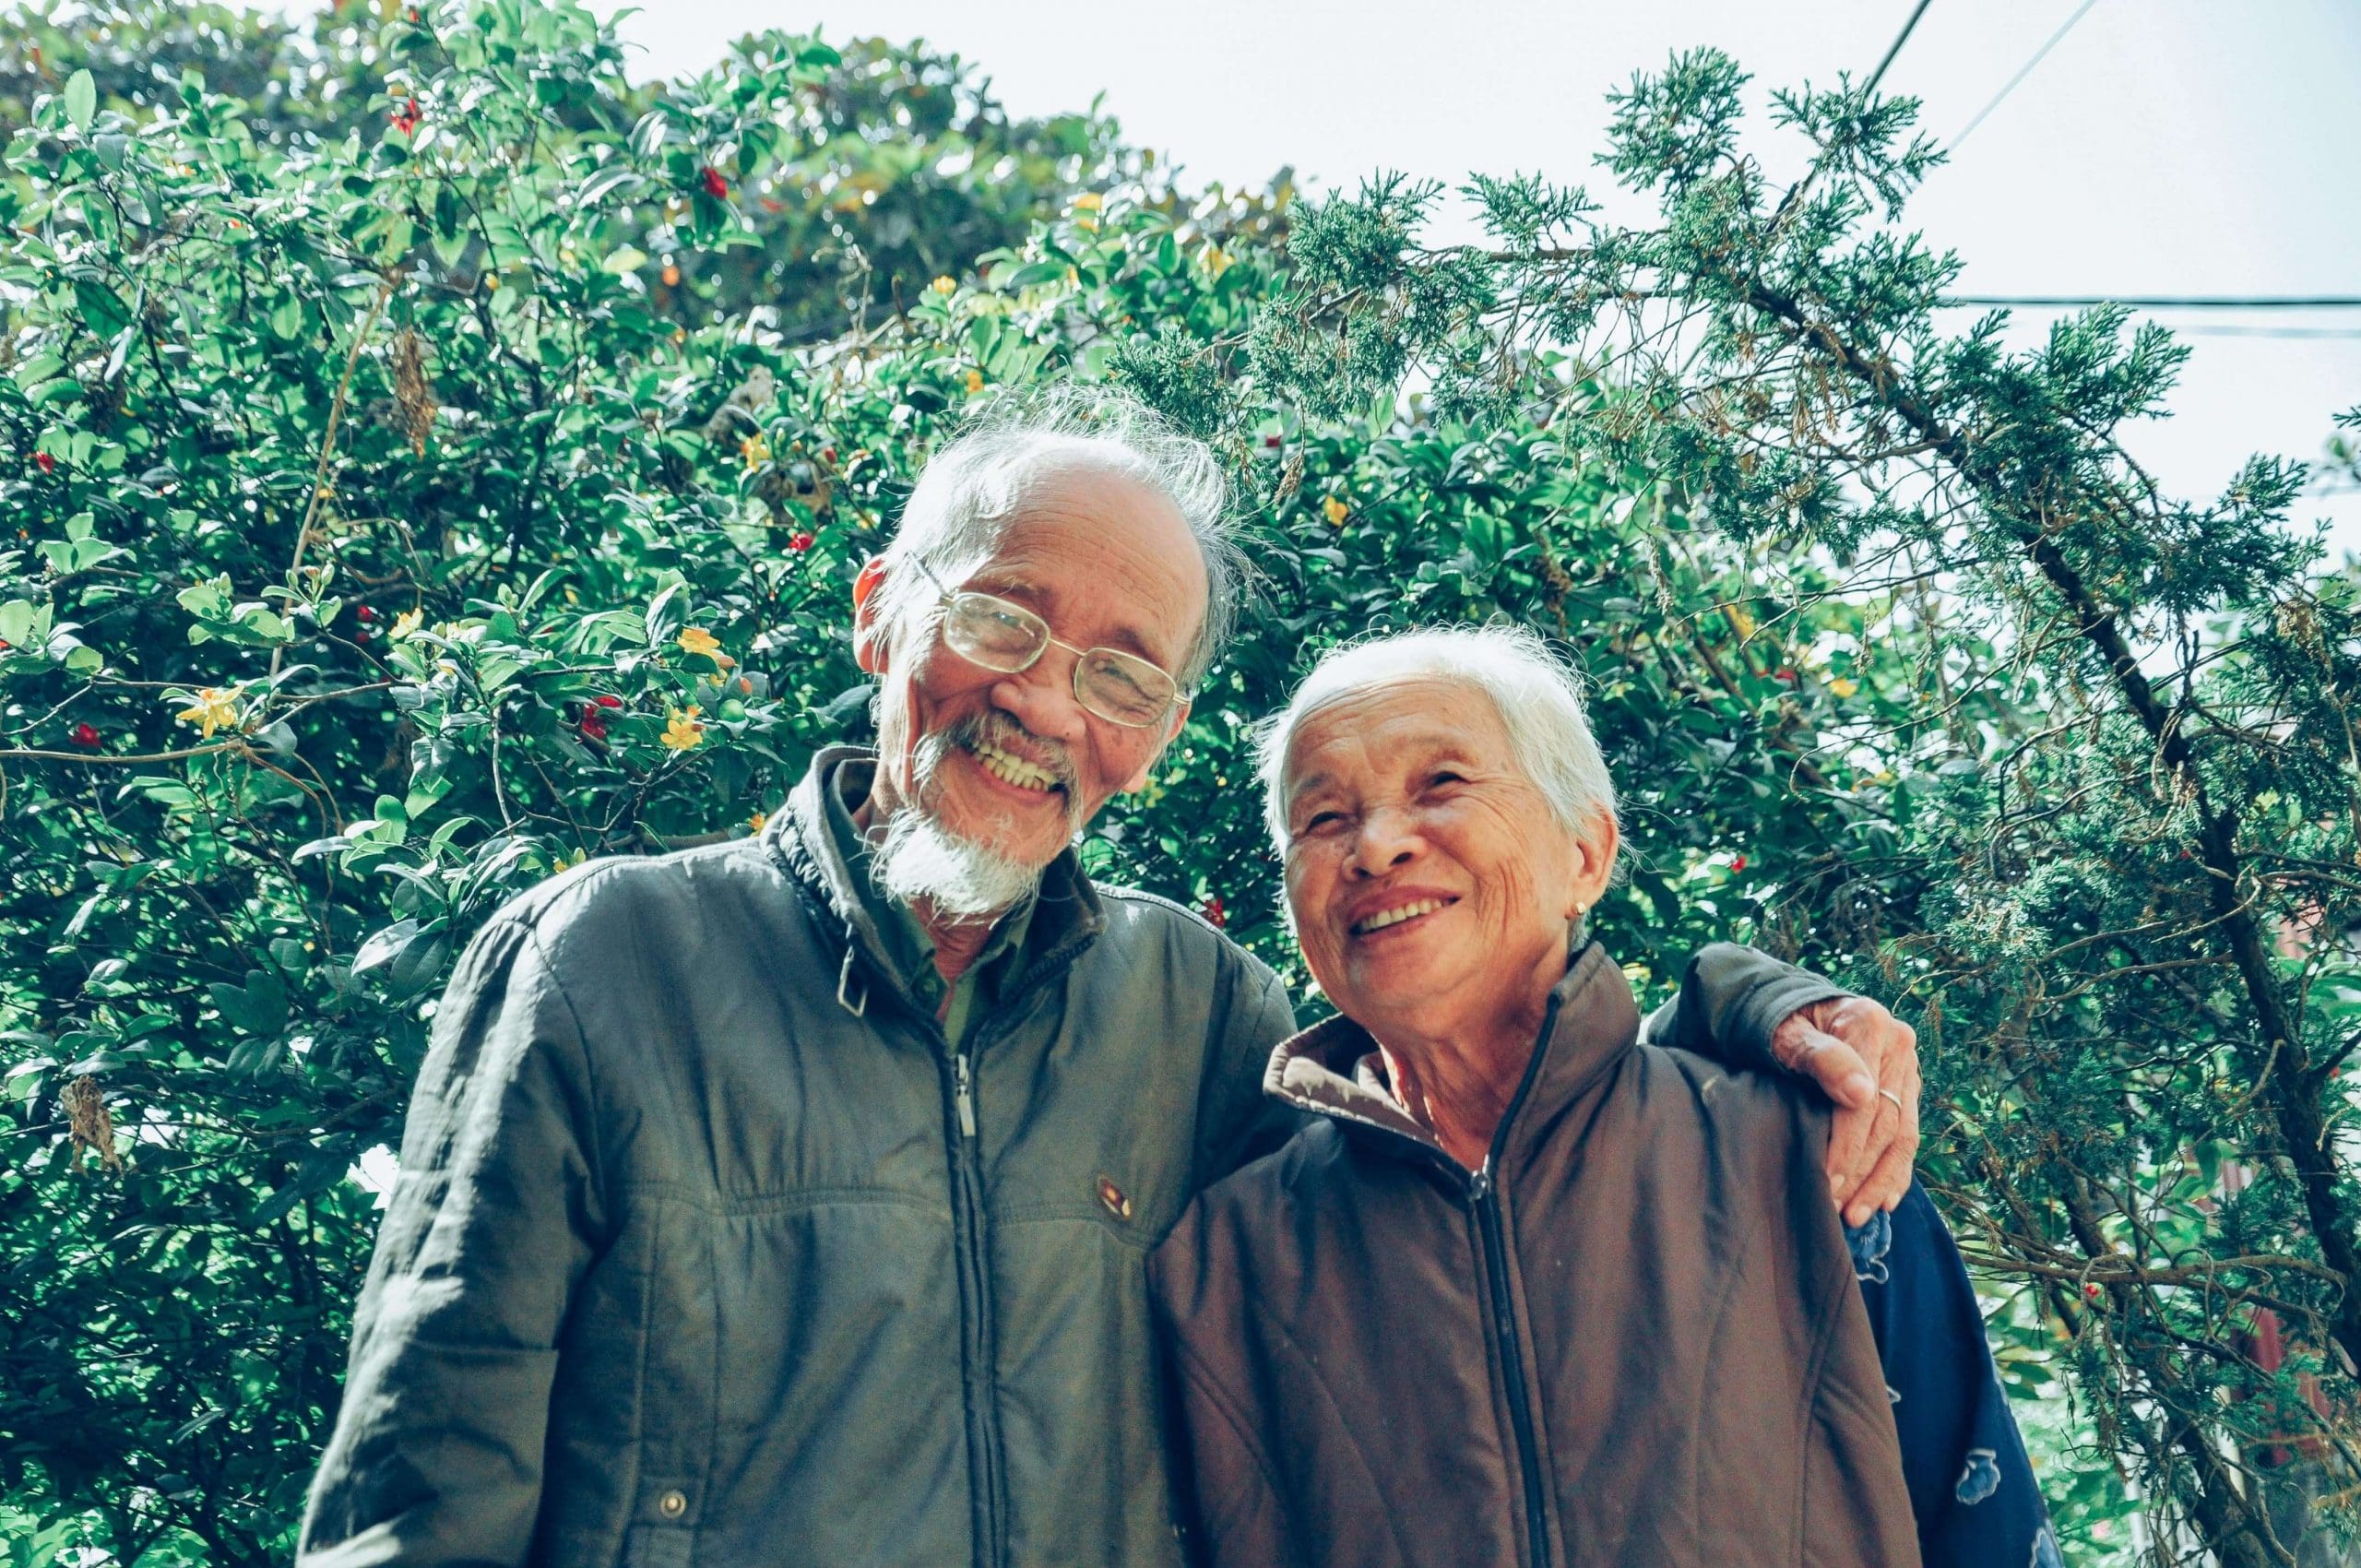 Smiling elderly couple standing in front of a tall hedge of trees